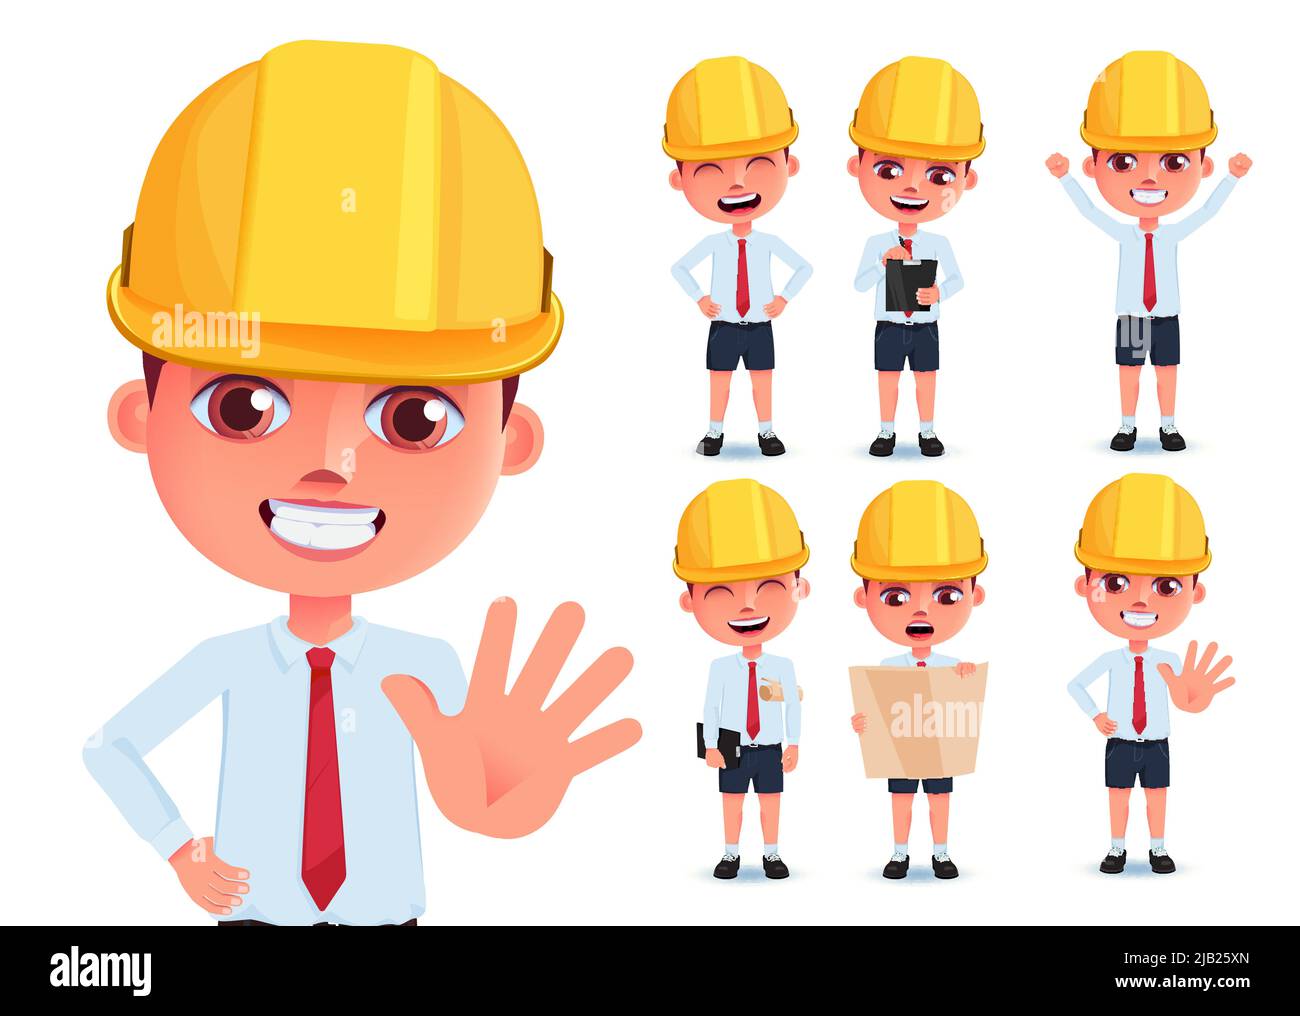 Boy students vector character set. Kid engineers character in happy, friendly and jolly facial expression with hard hat for male profession collection. Stock Vector